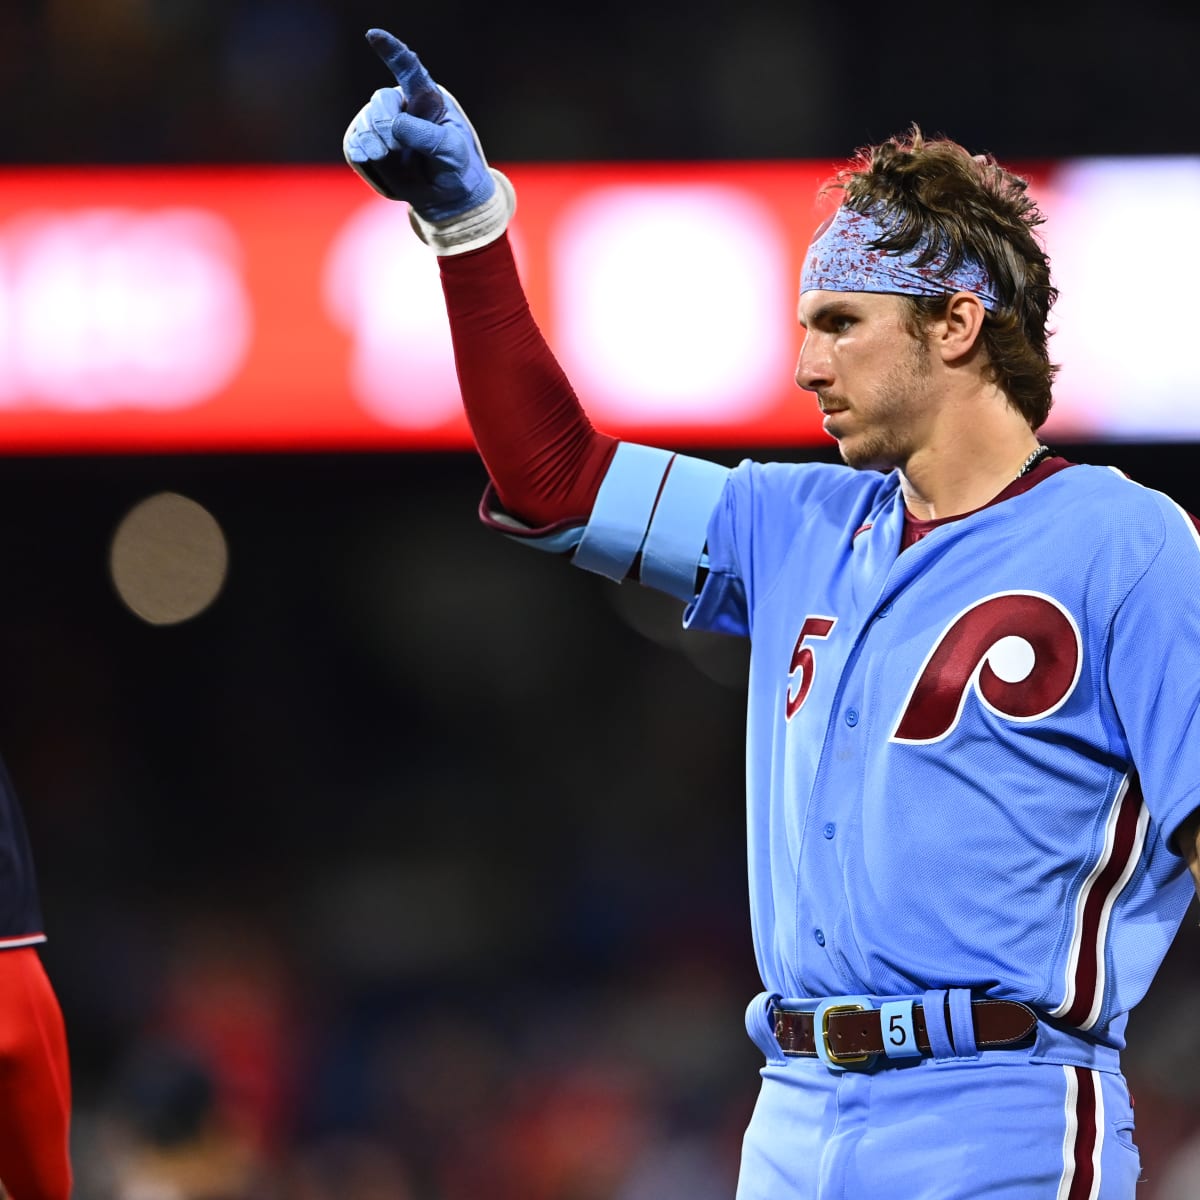 Can Bryson Stott's Breakout Be Traced to Philadelphia Phillies